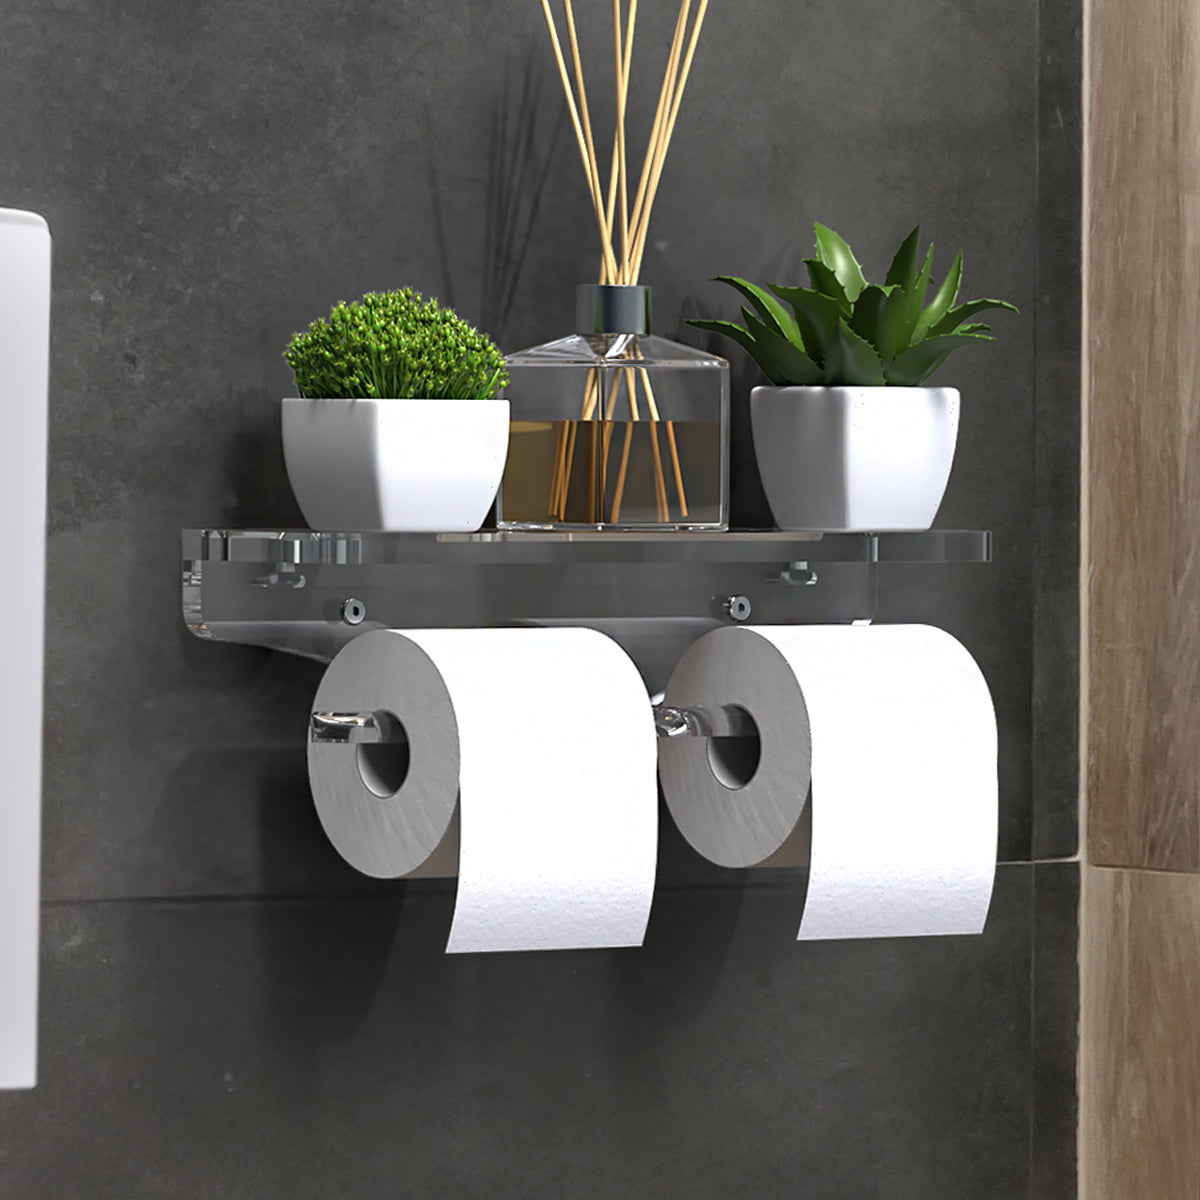 double-toilet-paper-holder-with-shelf.jpg__PID:9377d927-ebe7-4bfd-a279-35bd8b62c9be